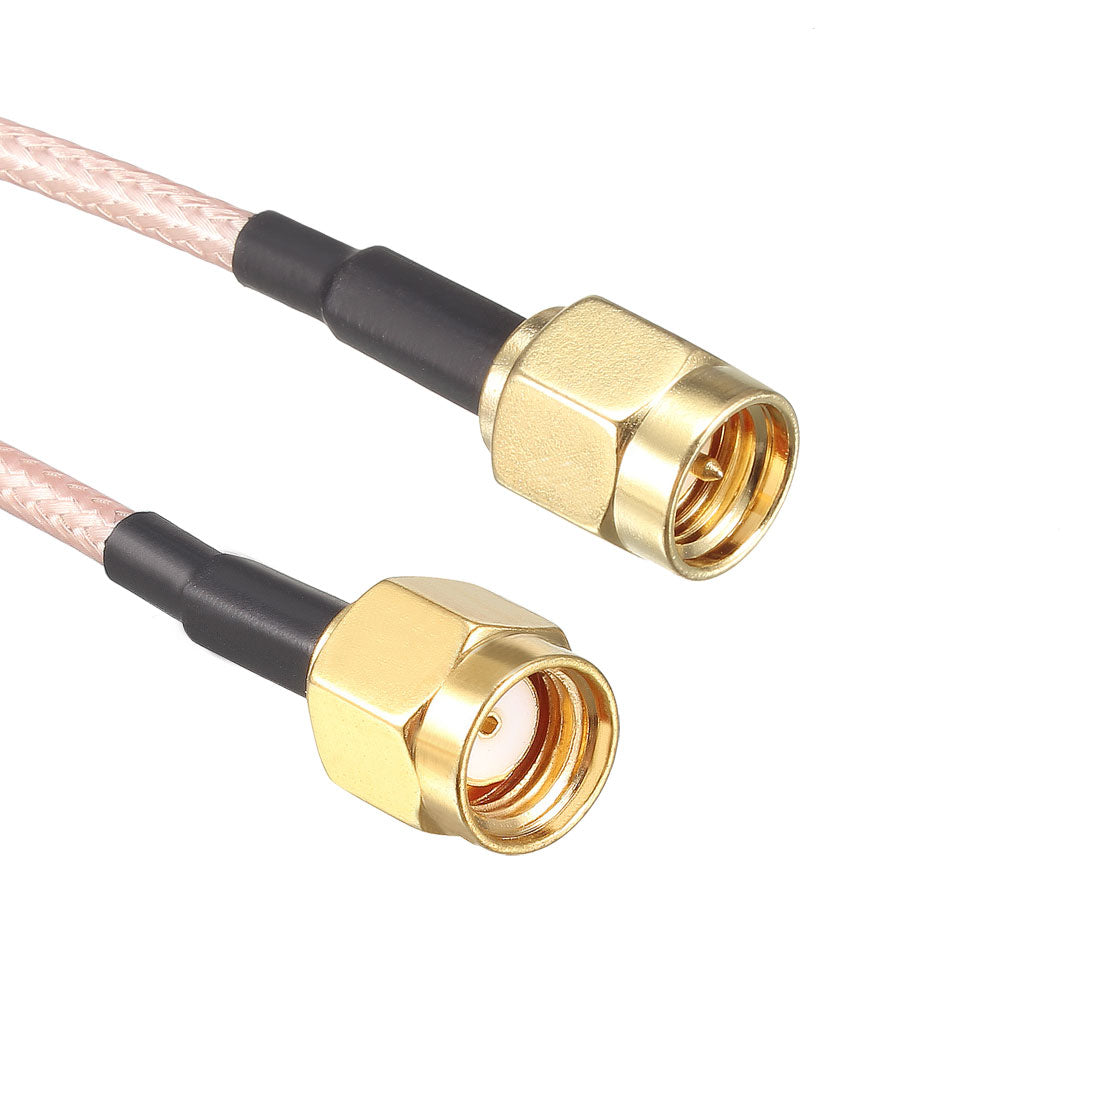 Uxcell Uxcell Low Loss RF Coaxial Cable Connection Coax Wire RG-178, RP-SMA Male to SMA Male 500cm